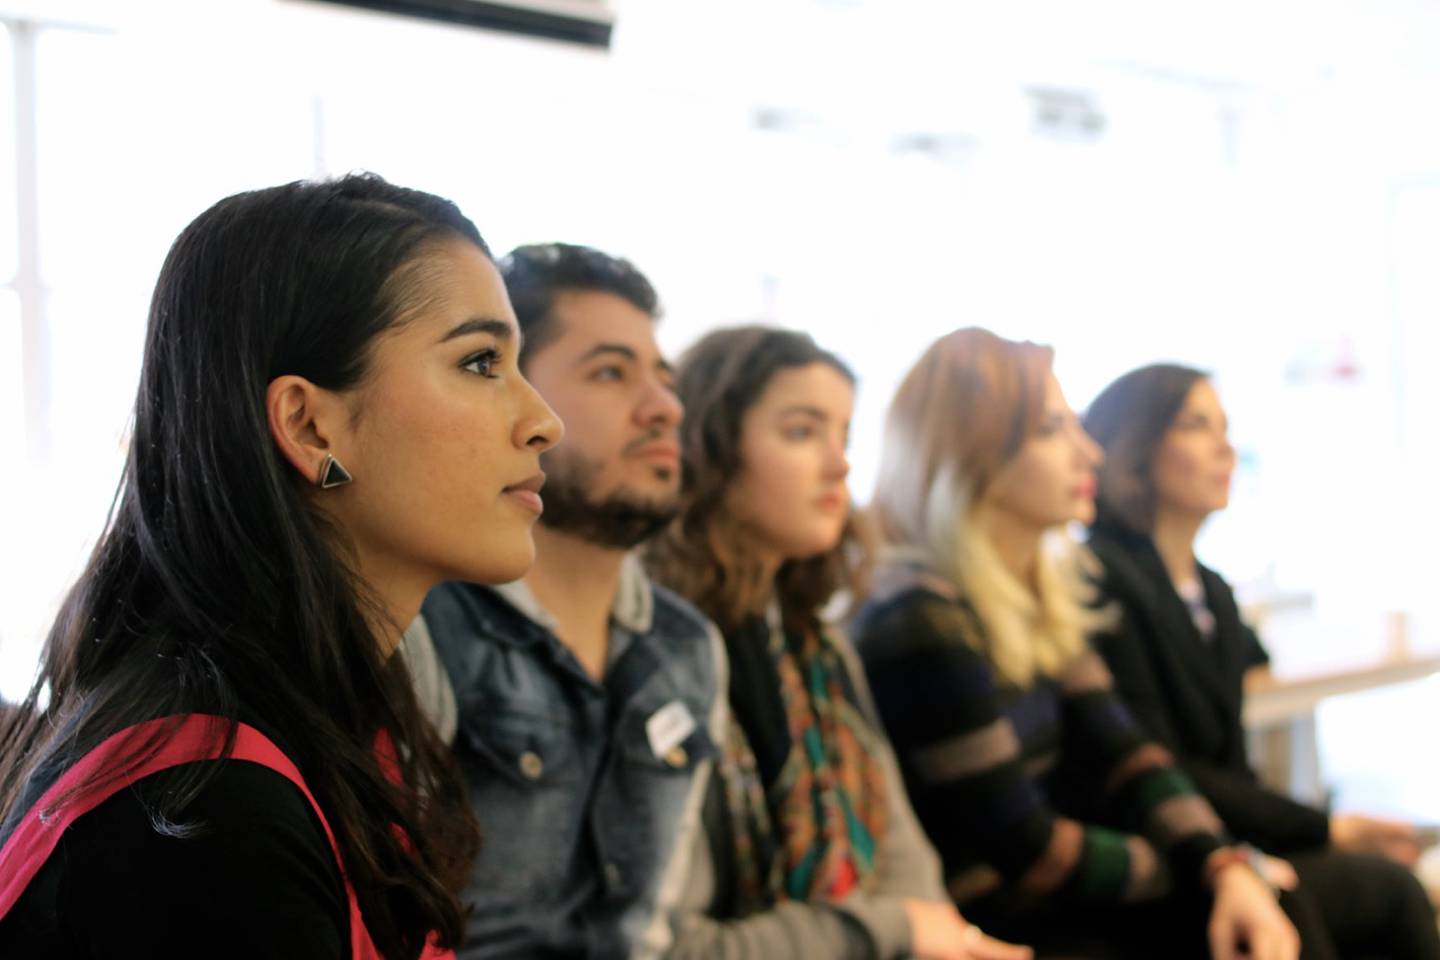 Founder Mursal Hedayat, foreground, at a teacher training session with language tutors at a bi-annual Chatterbox Gathering event. Photo: Chatterbox